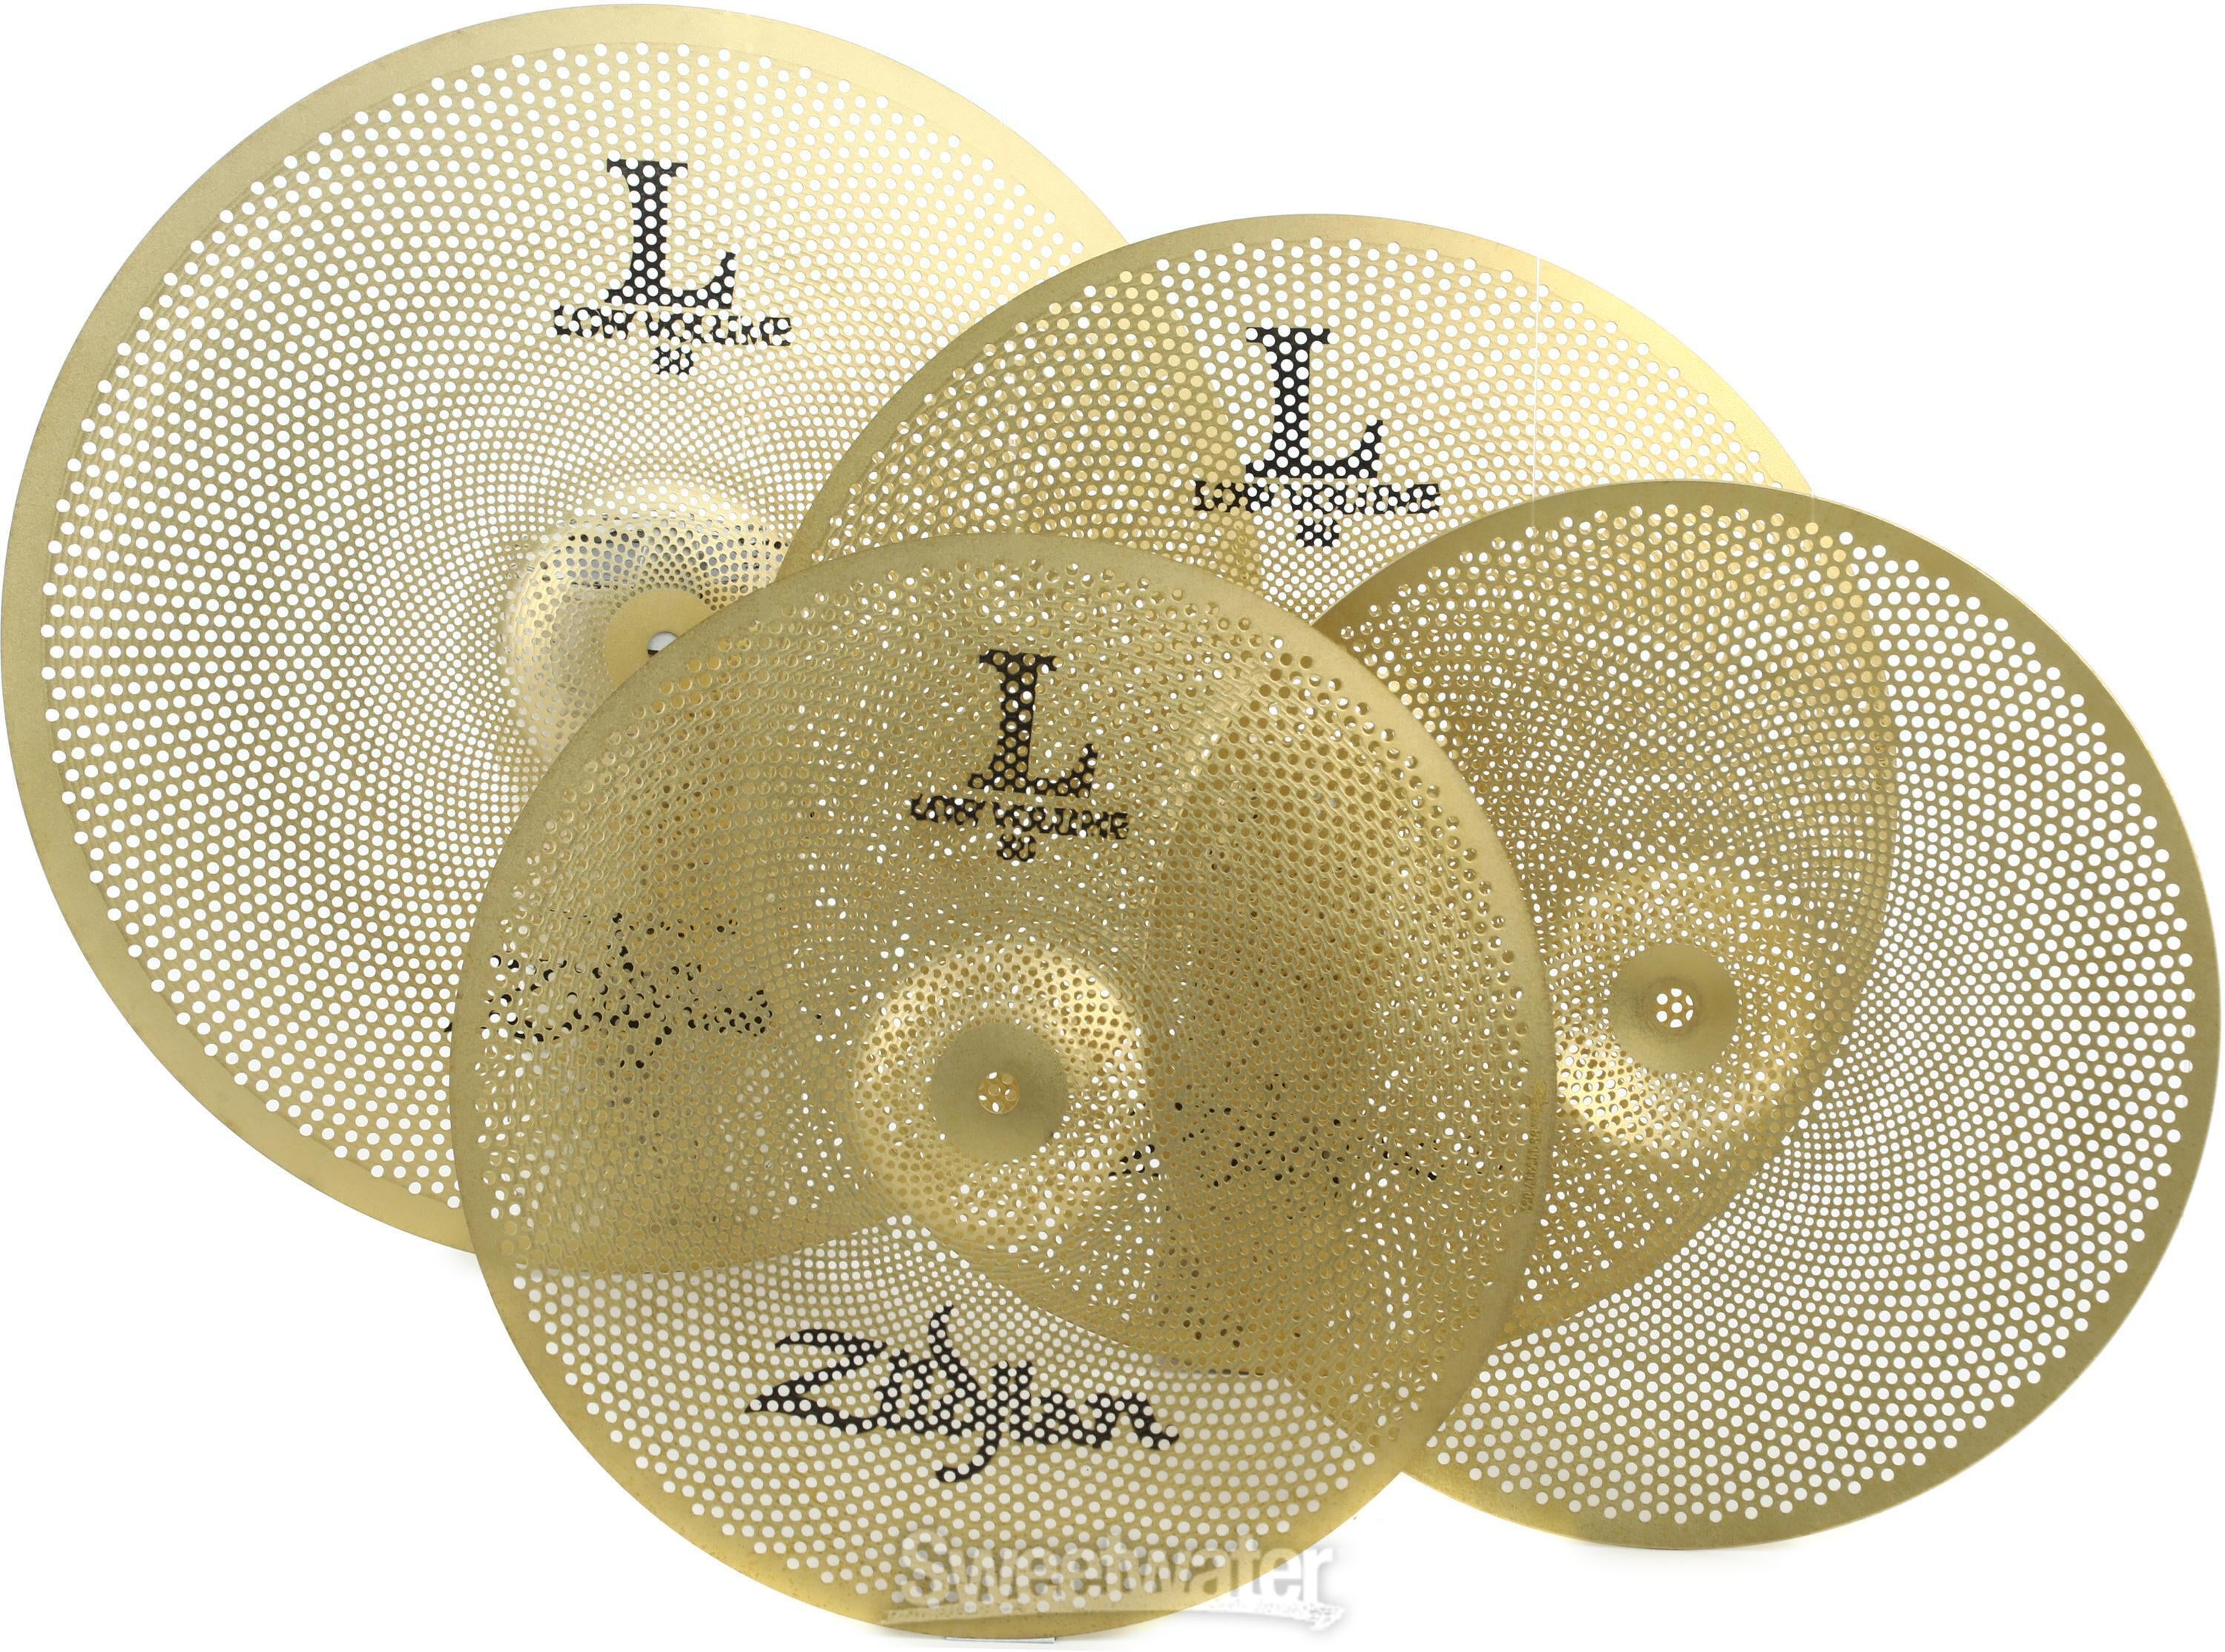 Zildjian Low Volume Accessory Set - L80 Cymbals and Remo